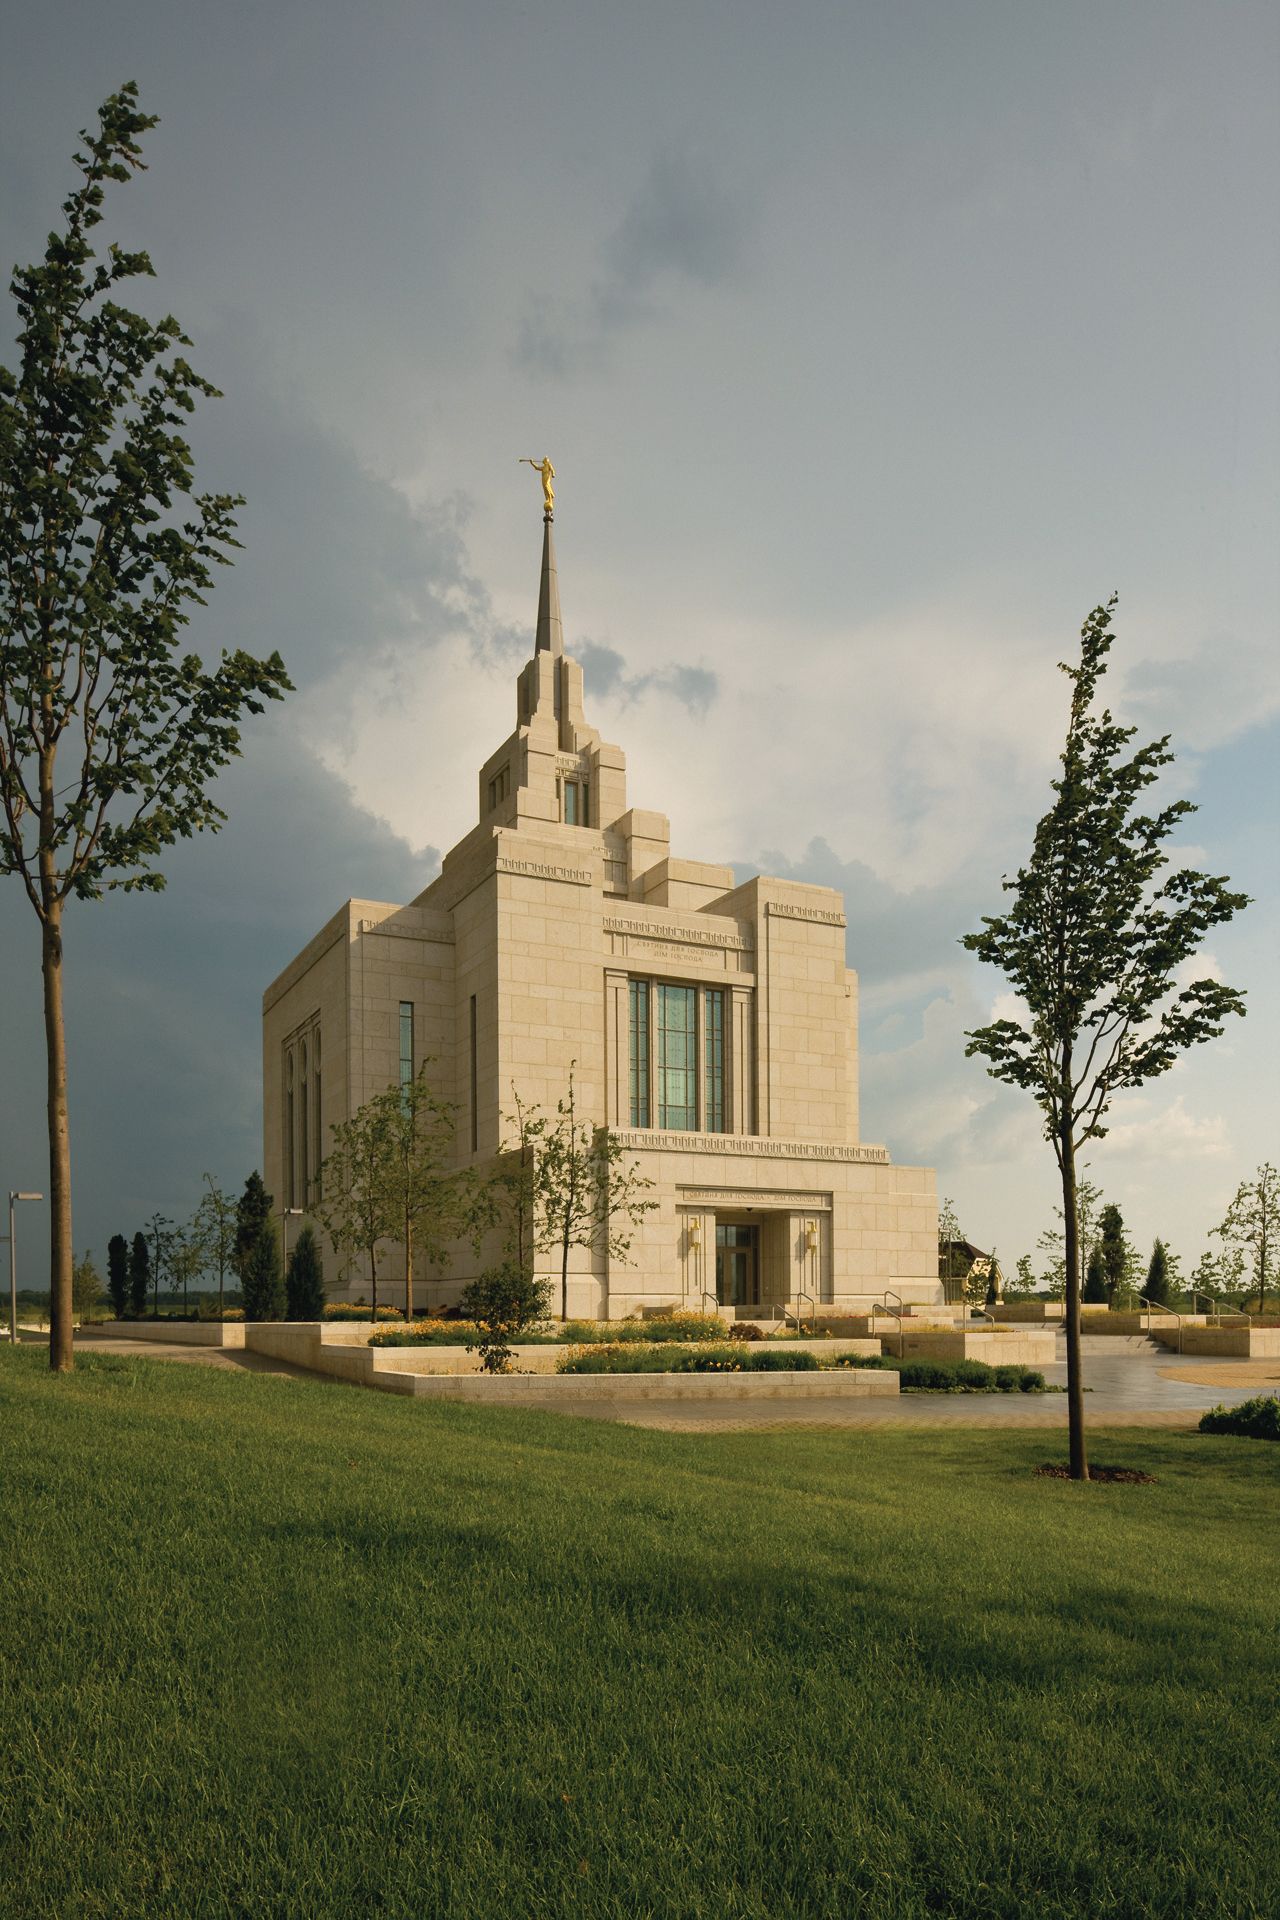 The entire Kyiv Ukraine Temple, including the entrance and scenery.